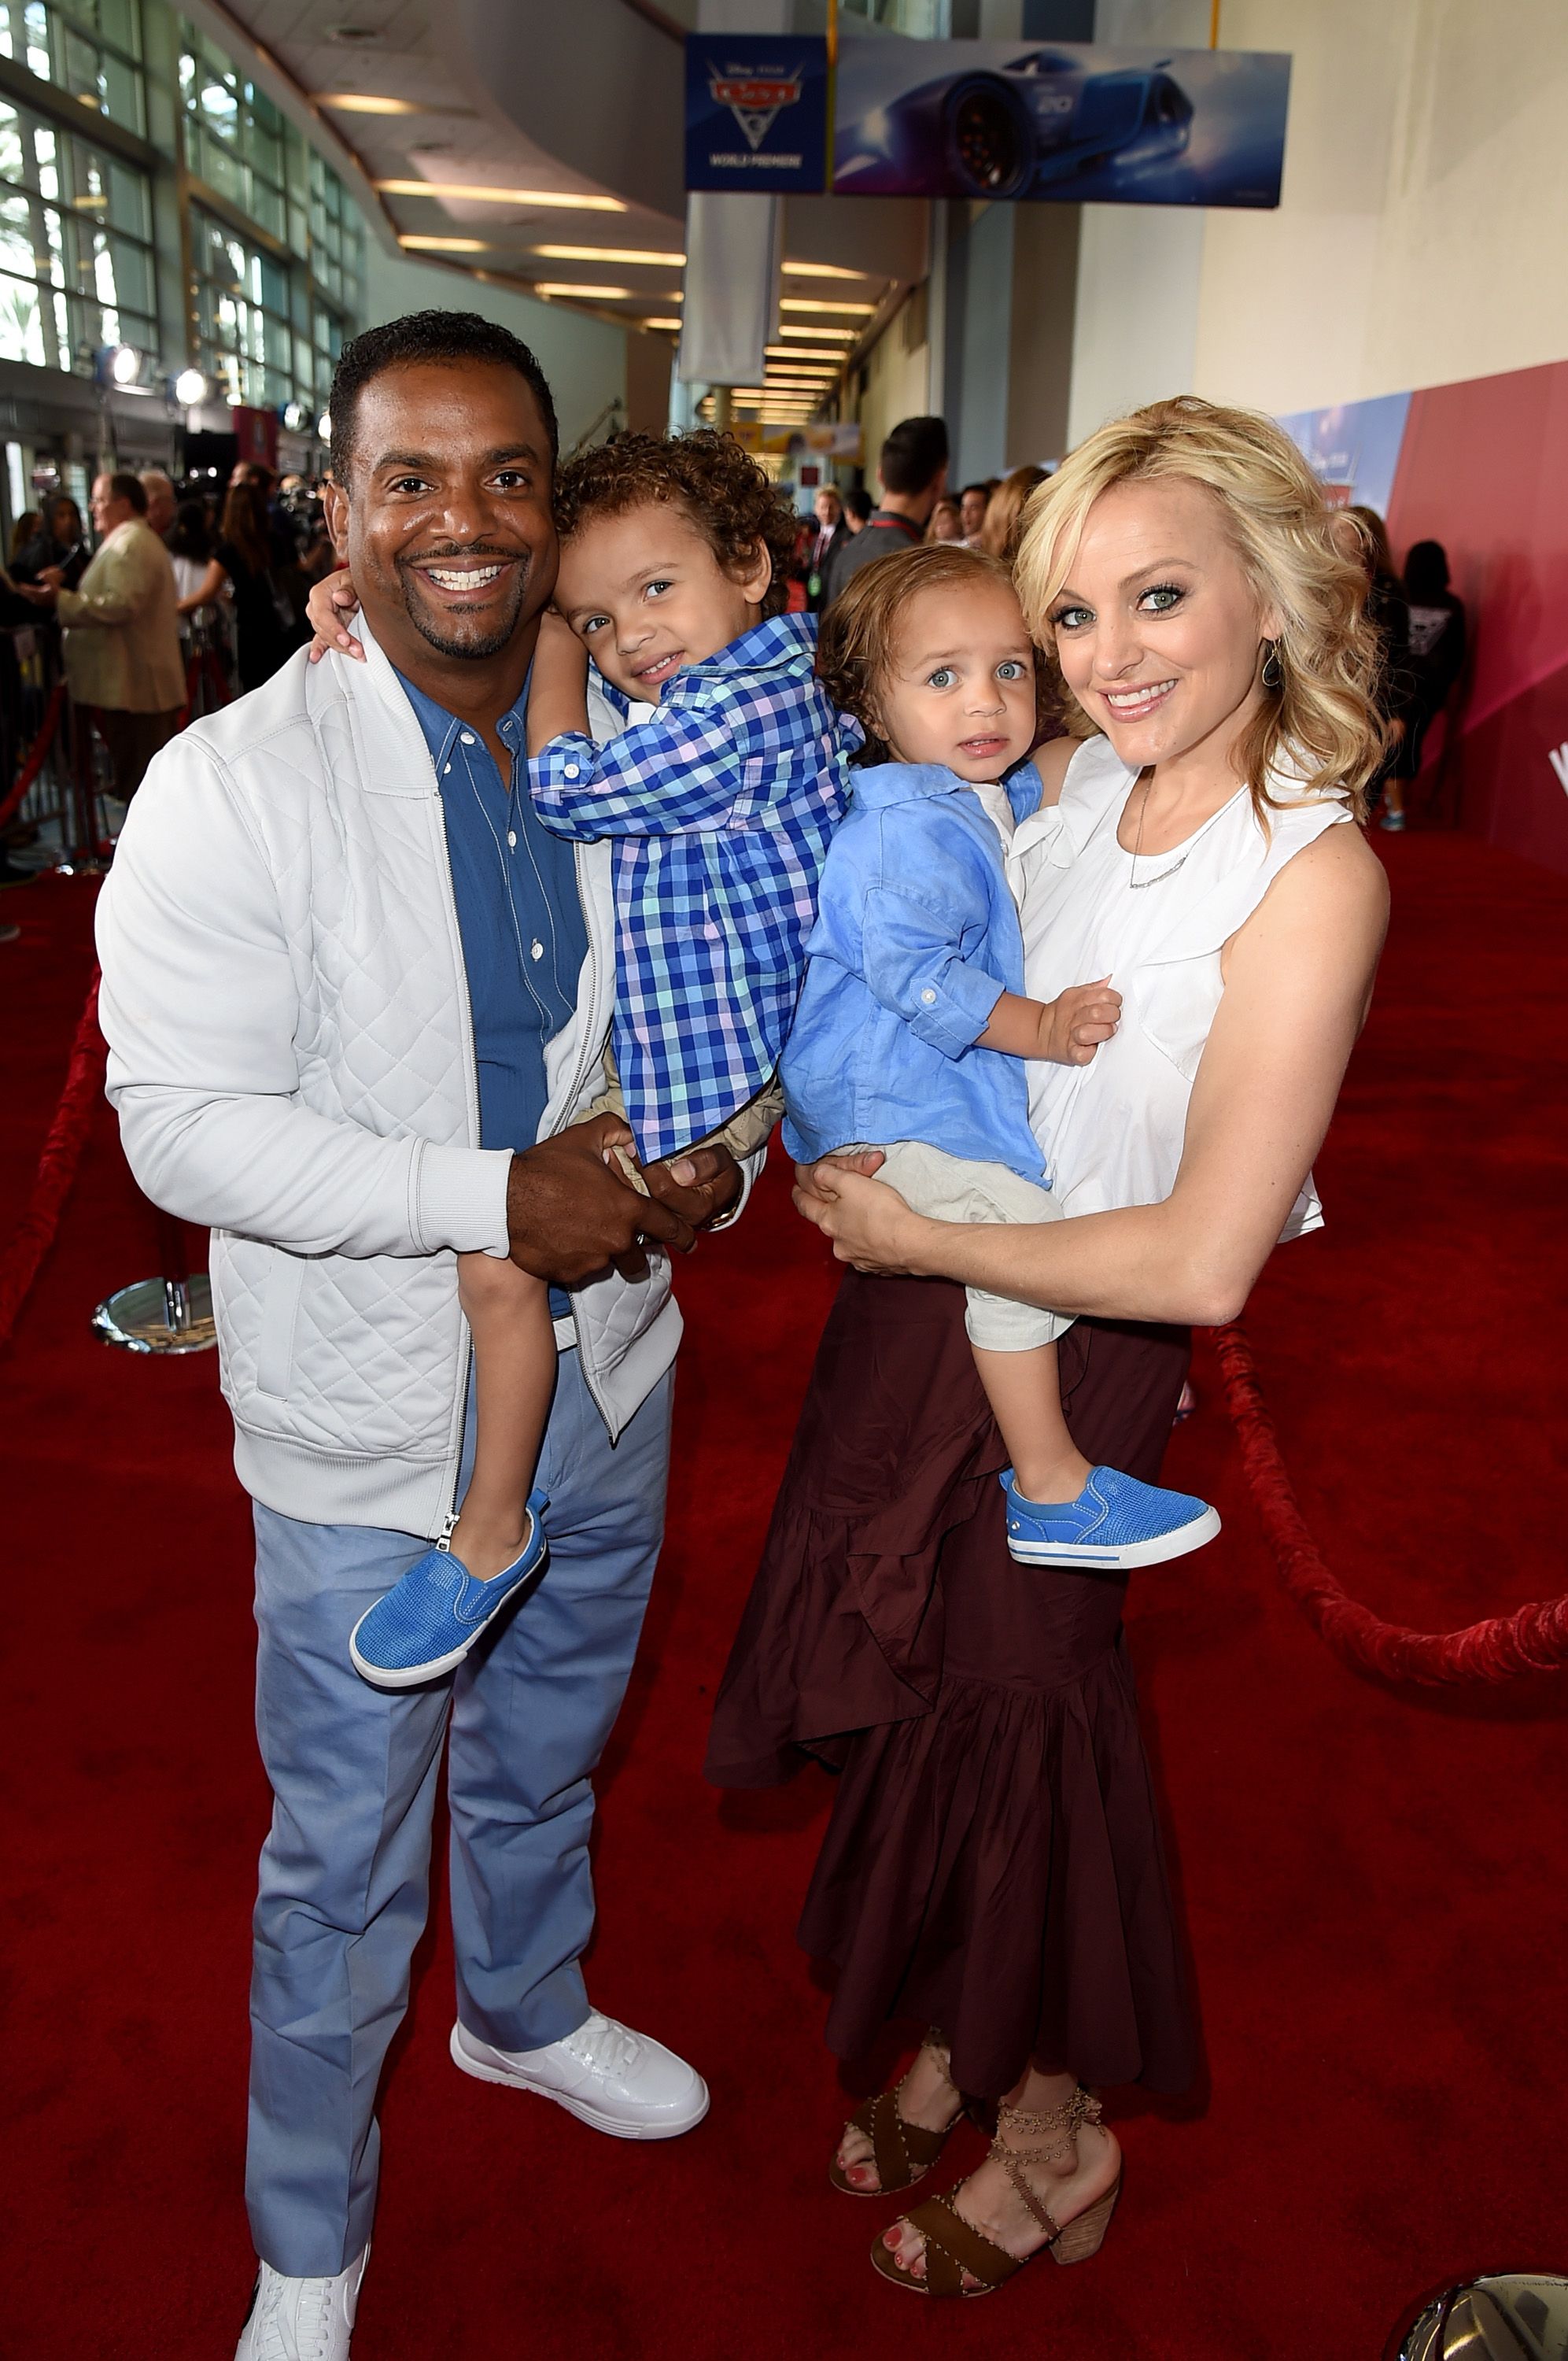 Alfonso Ribeiro, Angela Unkrich, and family at the premiere of Disney and Pixar's "Cars 3" at Anaheim Convention Center on June 10, 2017 | Photo: Getty Images